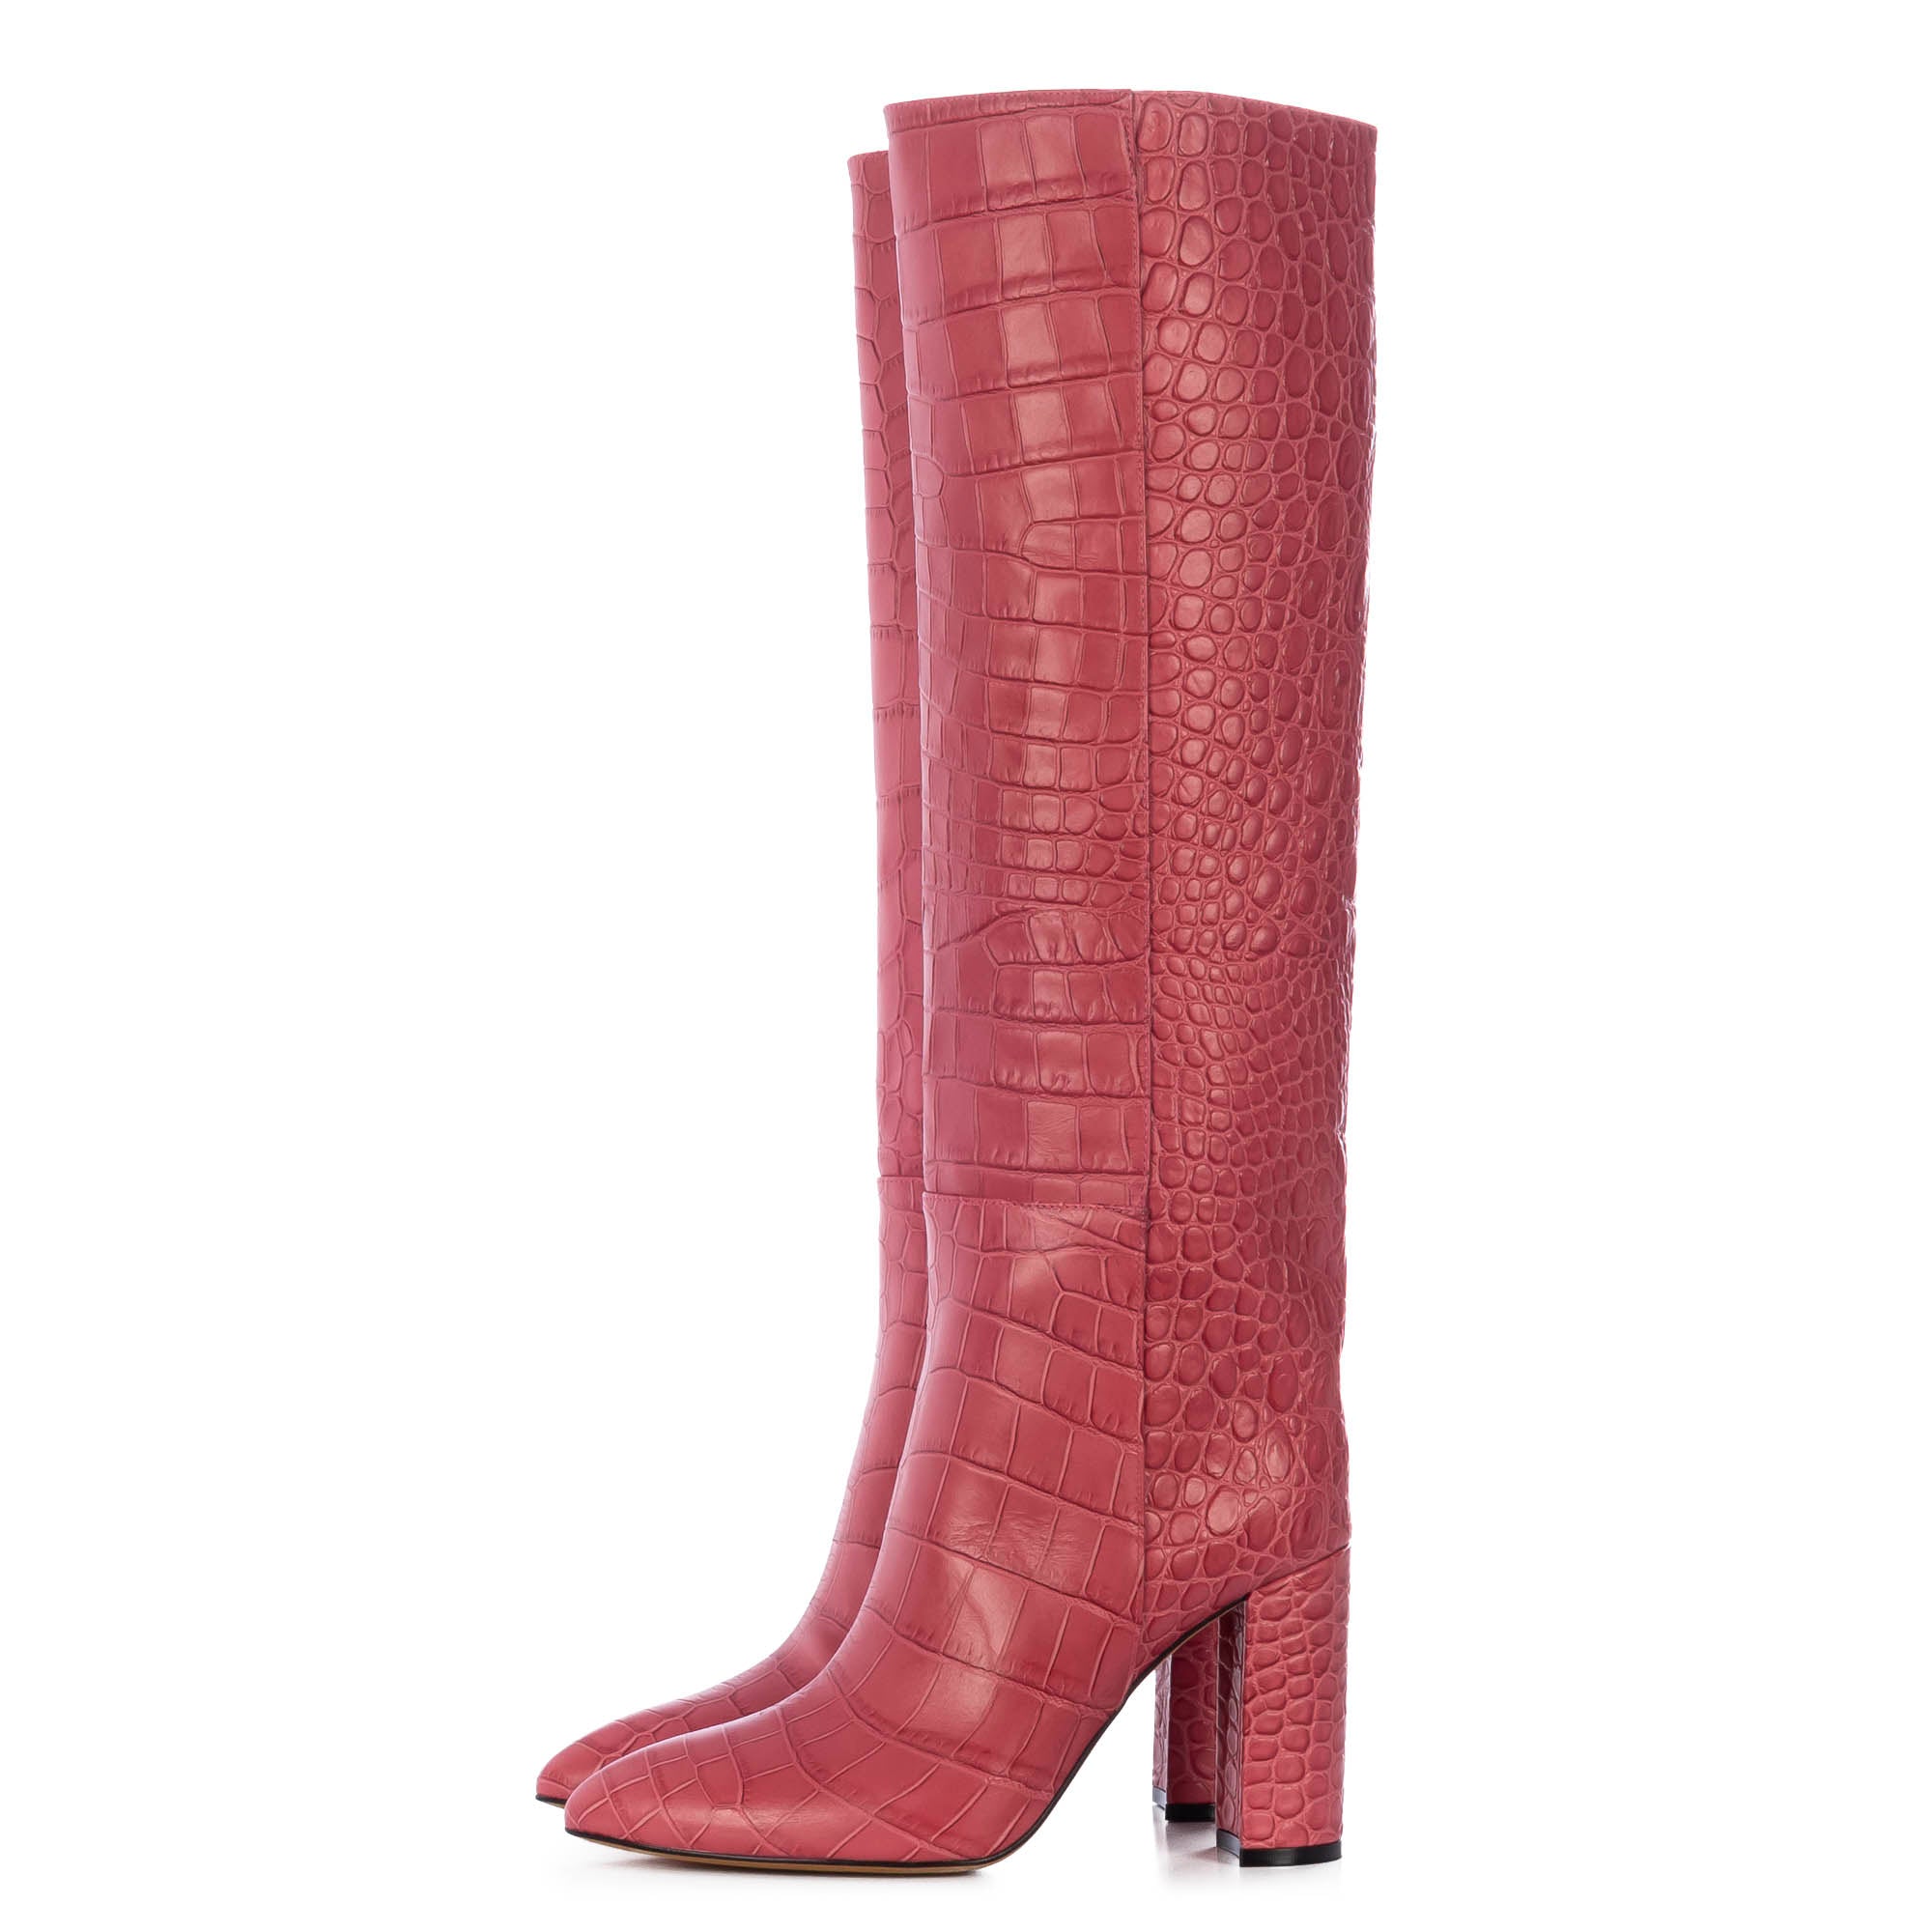 LAMPONE TALL BOOTS WITH ANIMAL PRINT